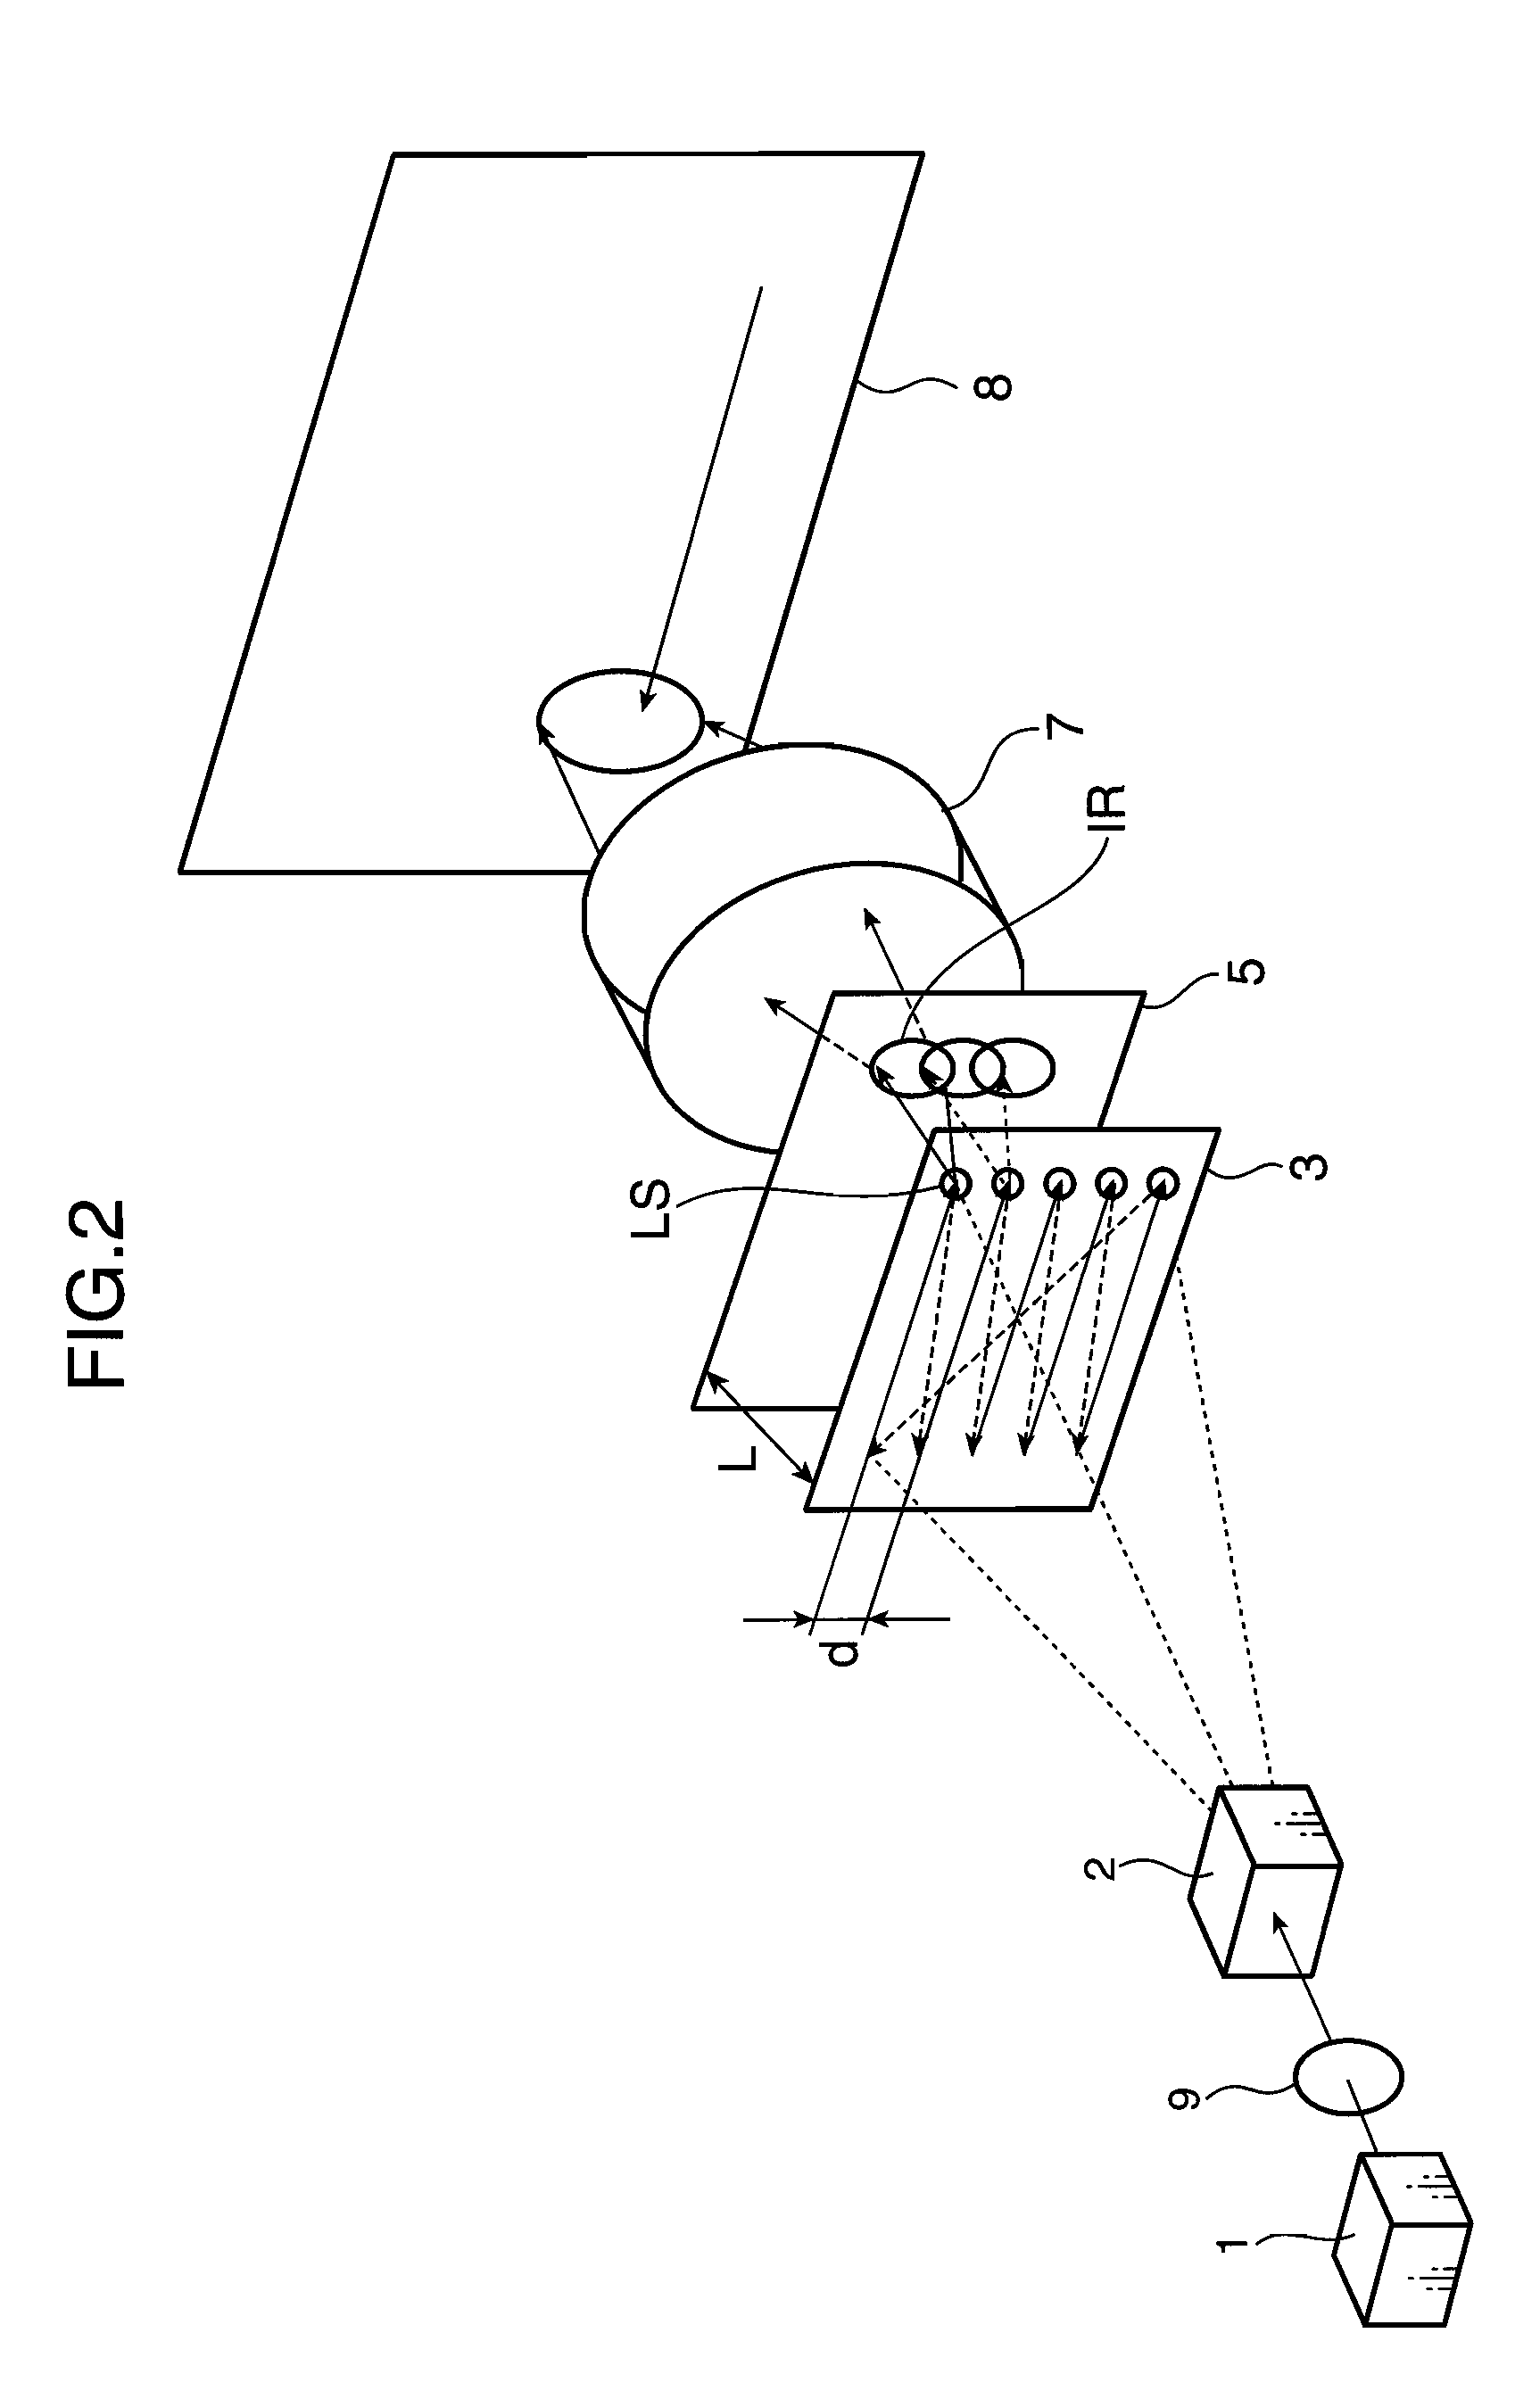 2-dimensional image display device or illumination device for obtaining uniform illumination and suppressing speckle noise